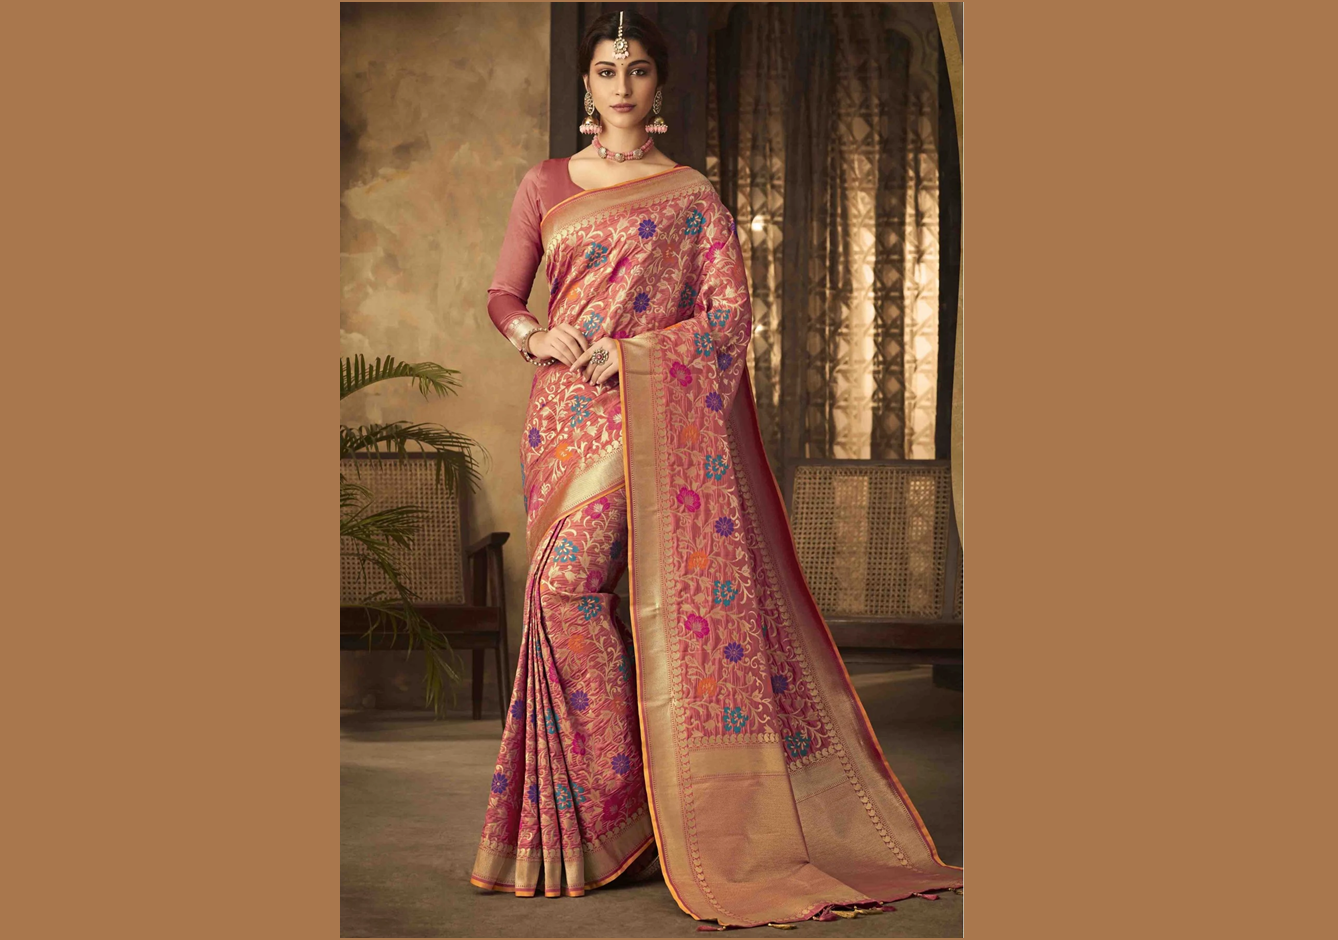 Why Indian Women Look Awesome in Traditional Sarees